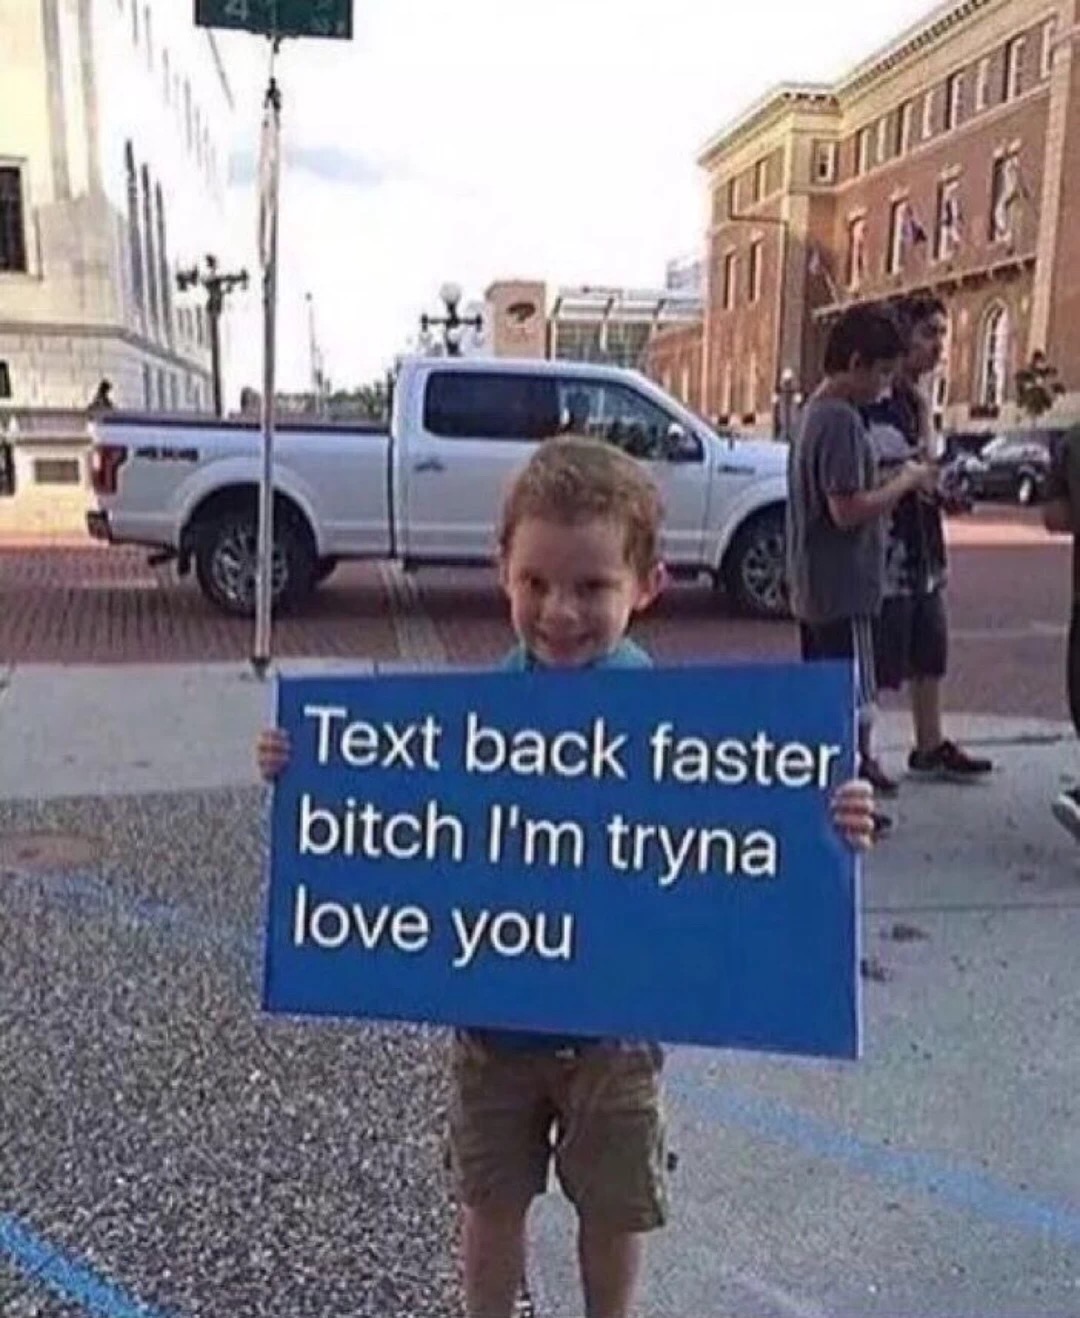 Kid holding up a text sign about telling a girl to write back faster.